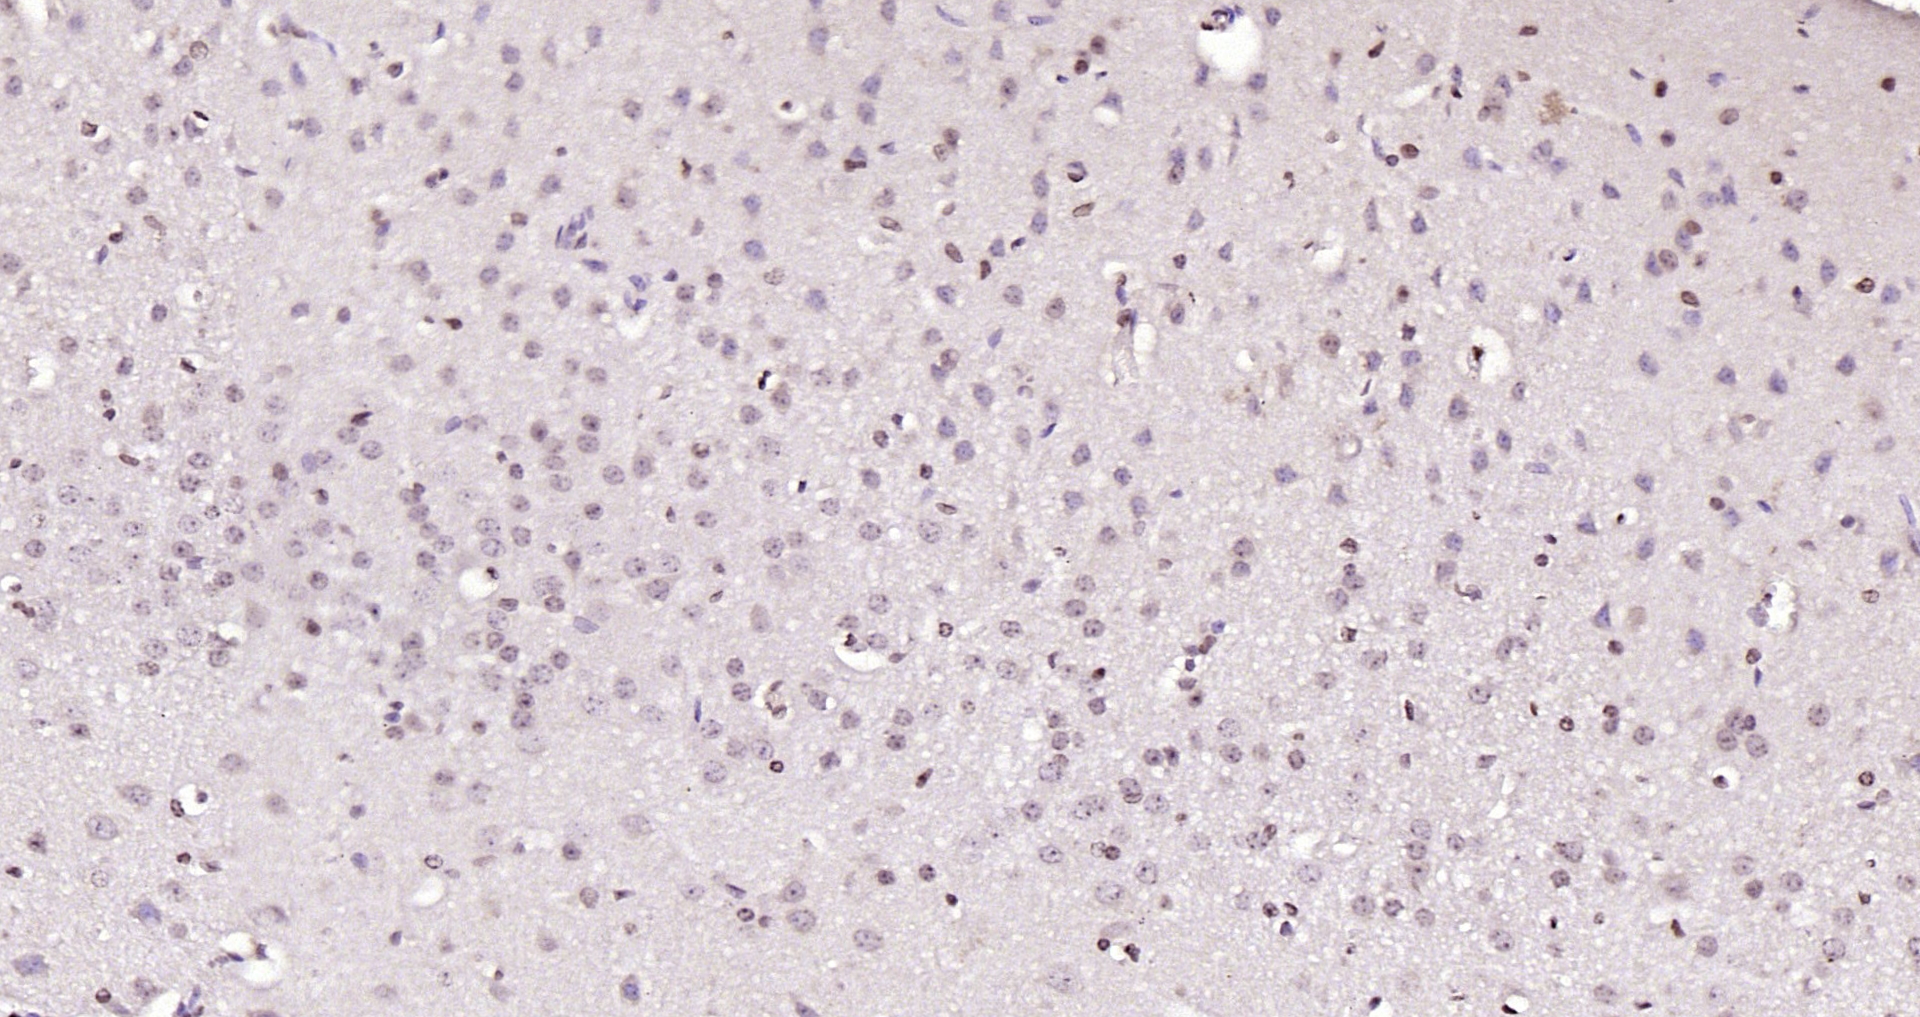 Paraformaldehyde-fixed, paraffin embedded (mouse brain); Antigen retrieval by boiling in sodium citrate buffer (pH6.0) for 15min; Block endogenous peroxidase by 3% hydrogen peroxide for 20 minutes; Blocking buffer (normal goat serum) at 37°C for 30min; Antibody incubation with (HDAC3/HD3) Polyclonal Antibody, Unconjugated (bs-10024R) at 1:200 overnight at 4°C, followed by operating according to SP Kit(Rabbit) (sp-0023) instructionsand DAB staining.